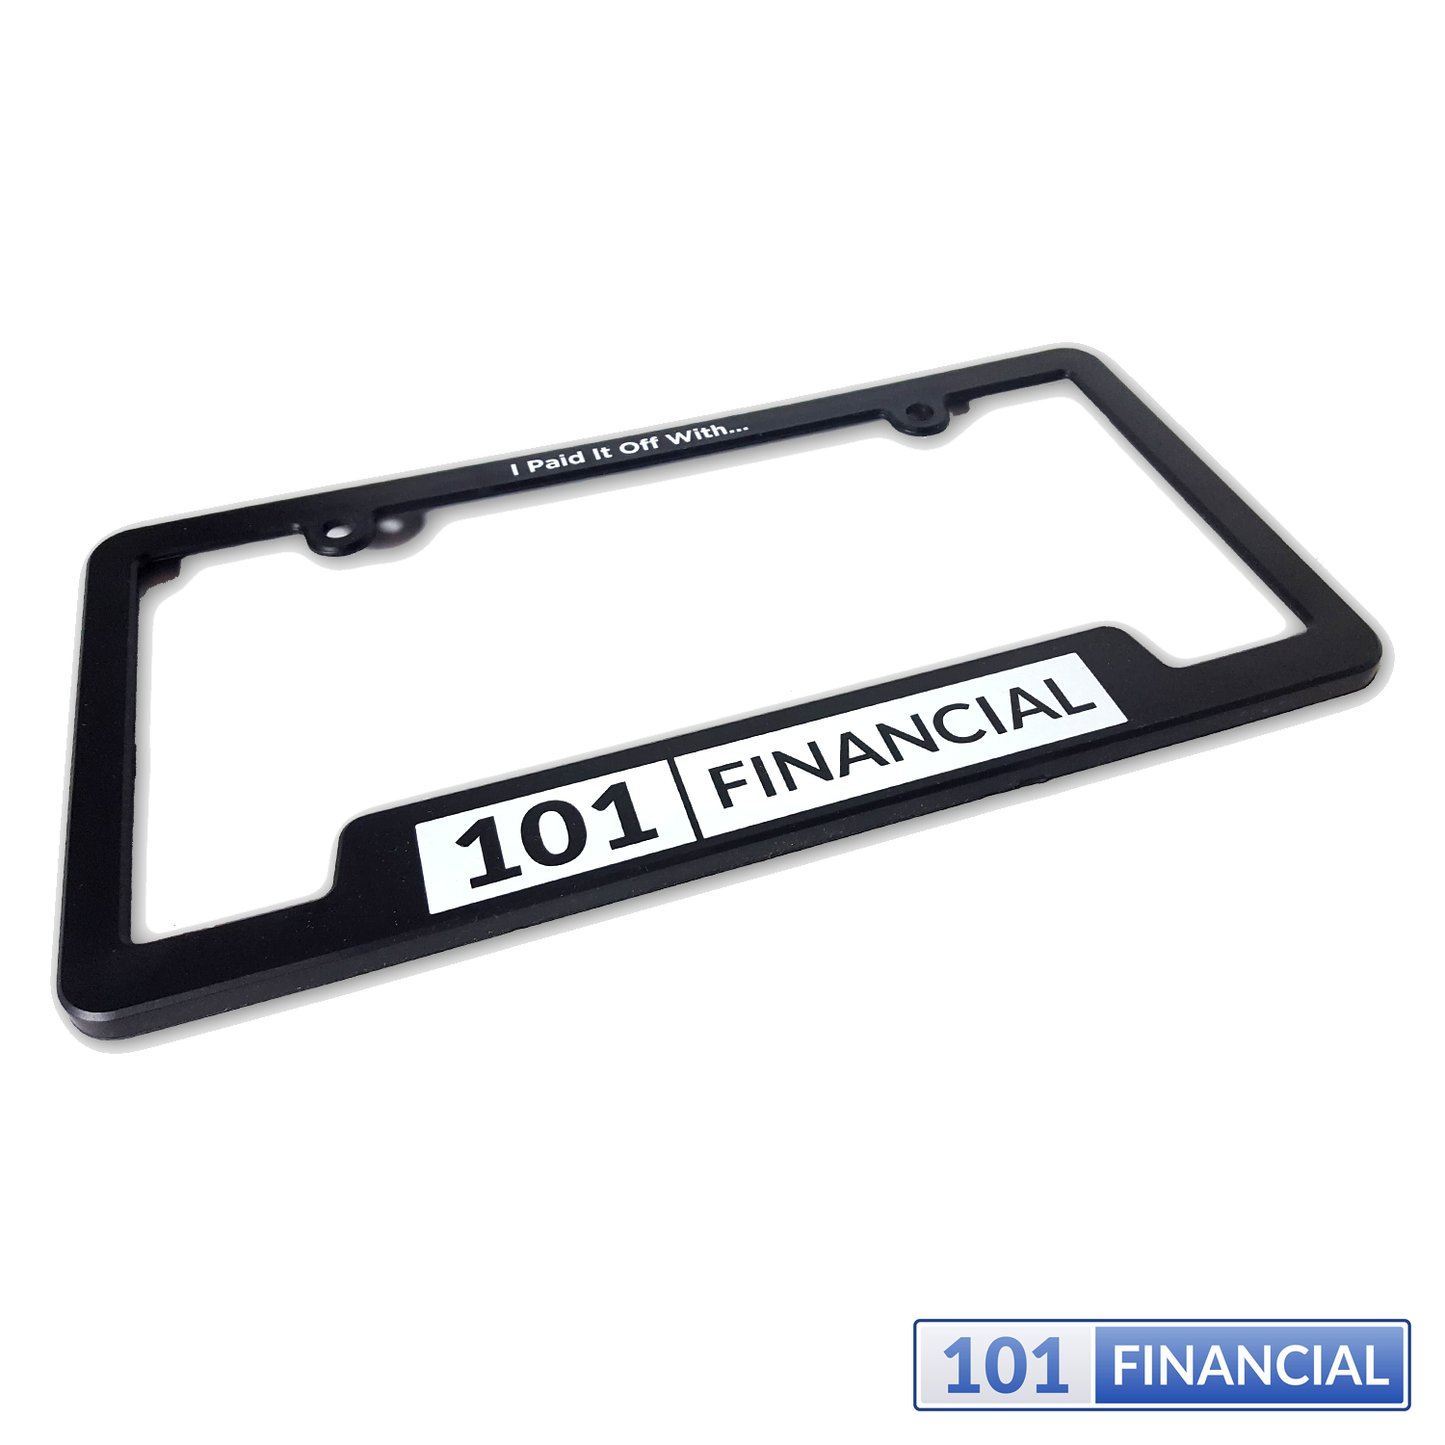 License Plate Frame - "I Paid It Off With"